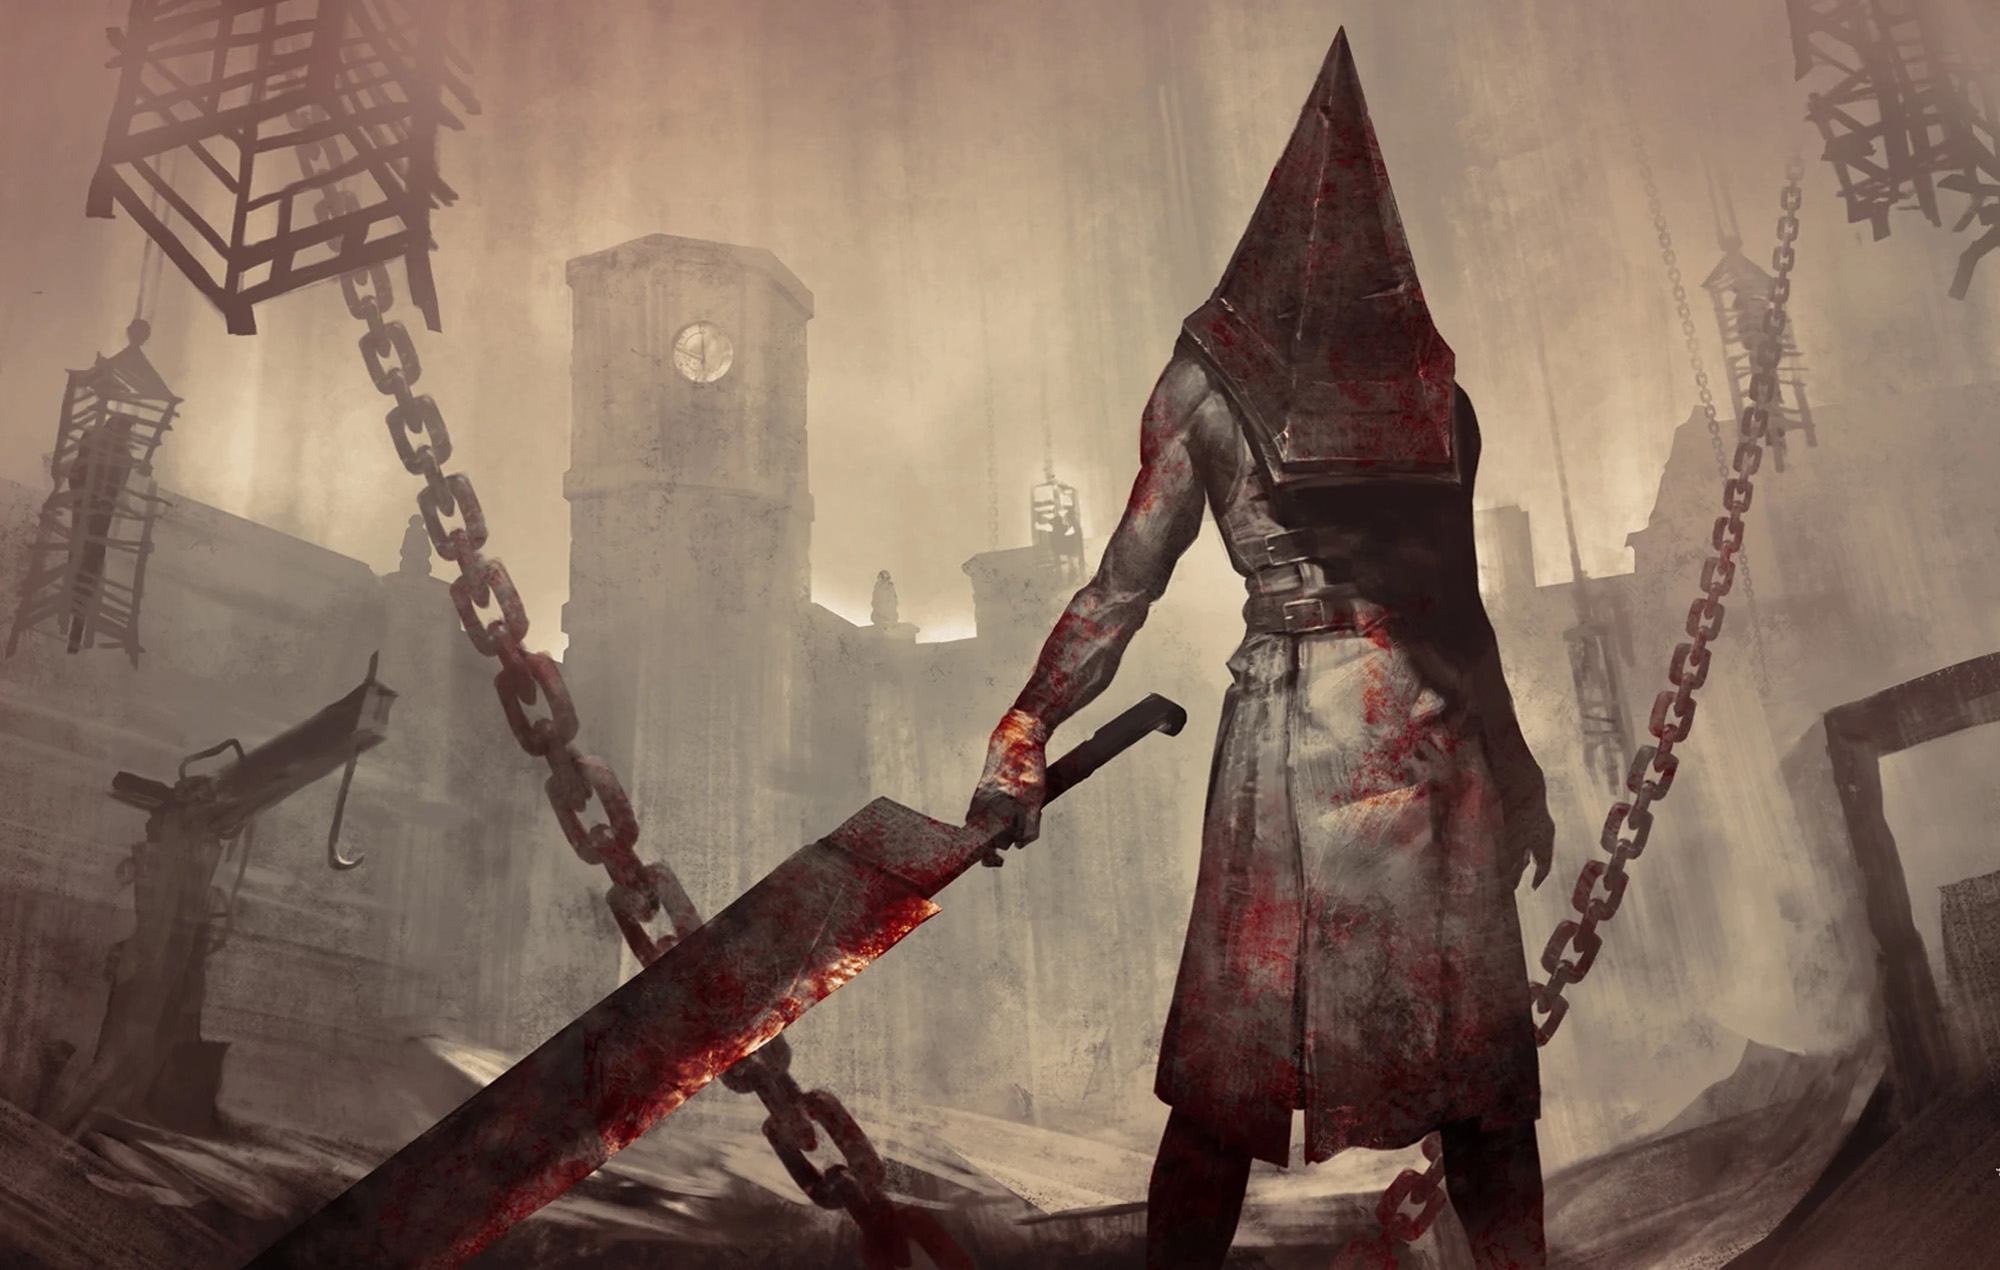 Silent Hill: Ascension does not look like the game we've been